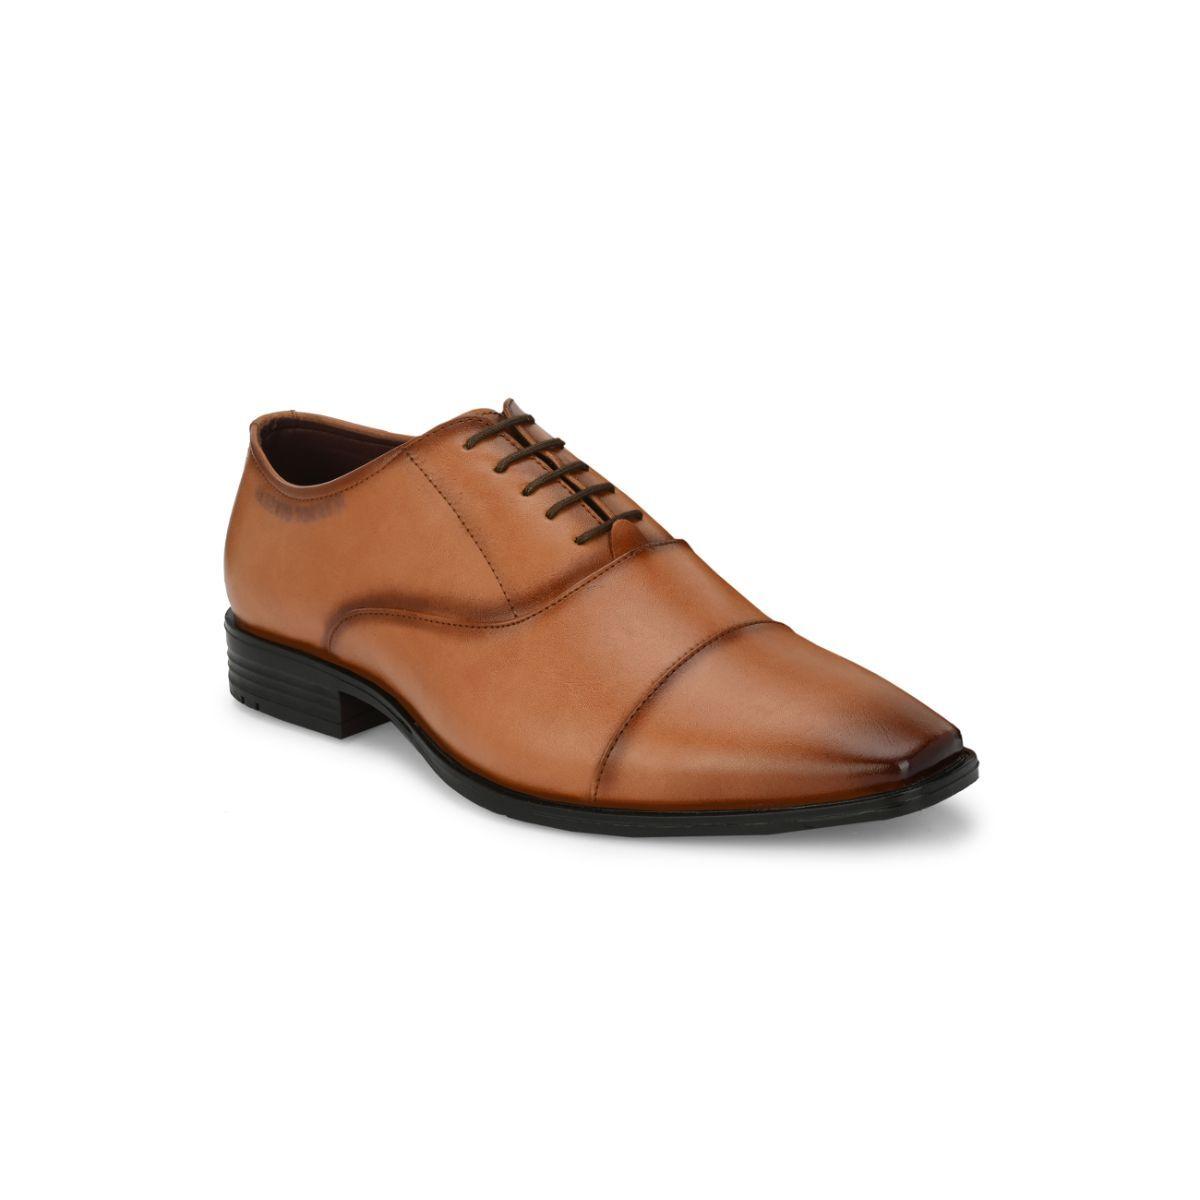 synthetic-tan-laceup-formal-shoes--tan